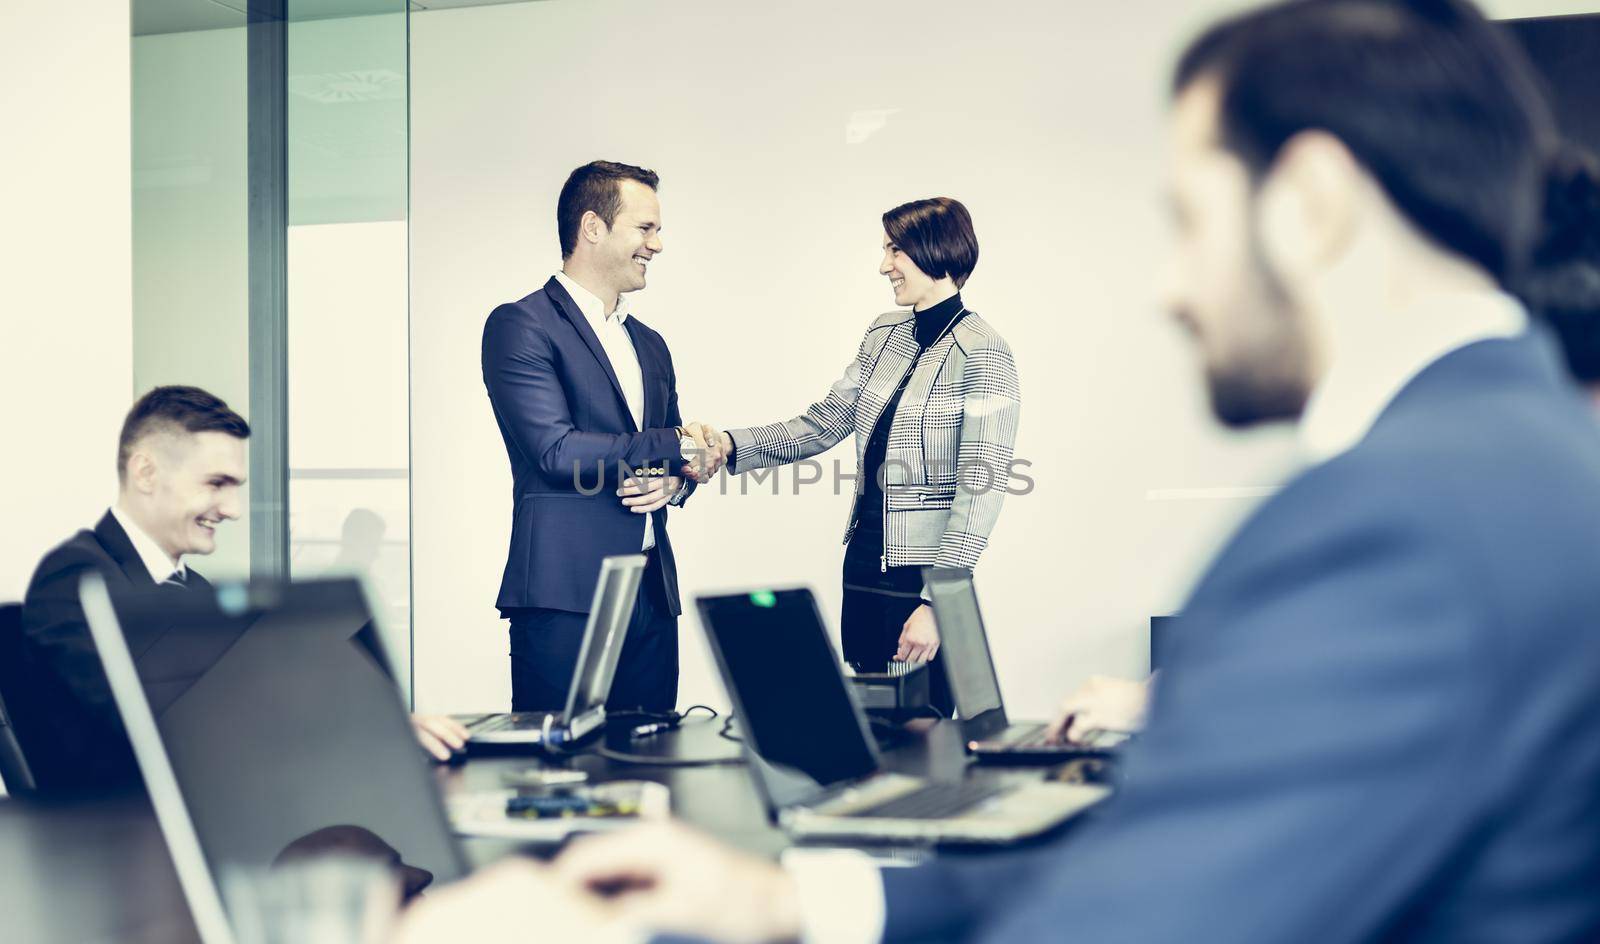 Sealing a deal. Business people shaking hands, finishing up meeting in corporate office. Businessman working on laptop in foreground. Business and entrepreneurship concept by kasto